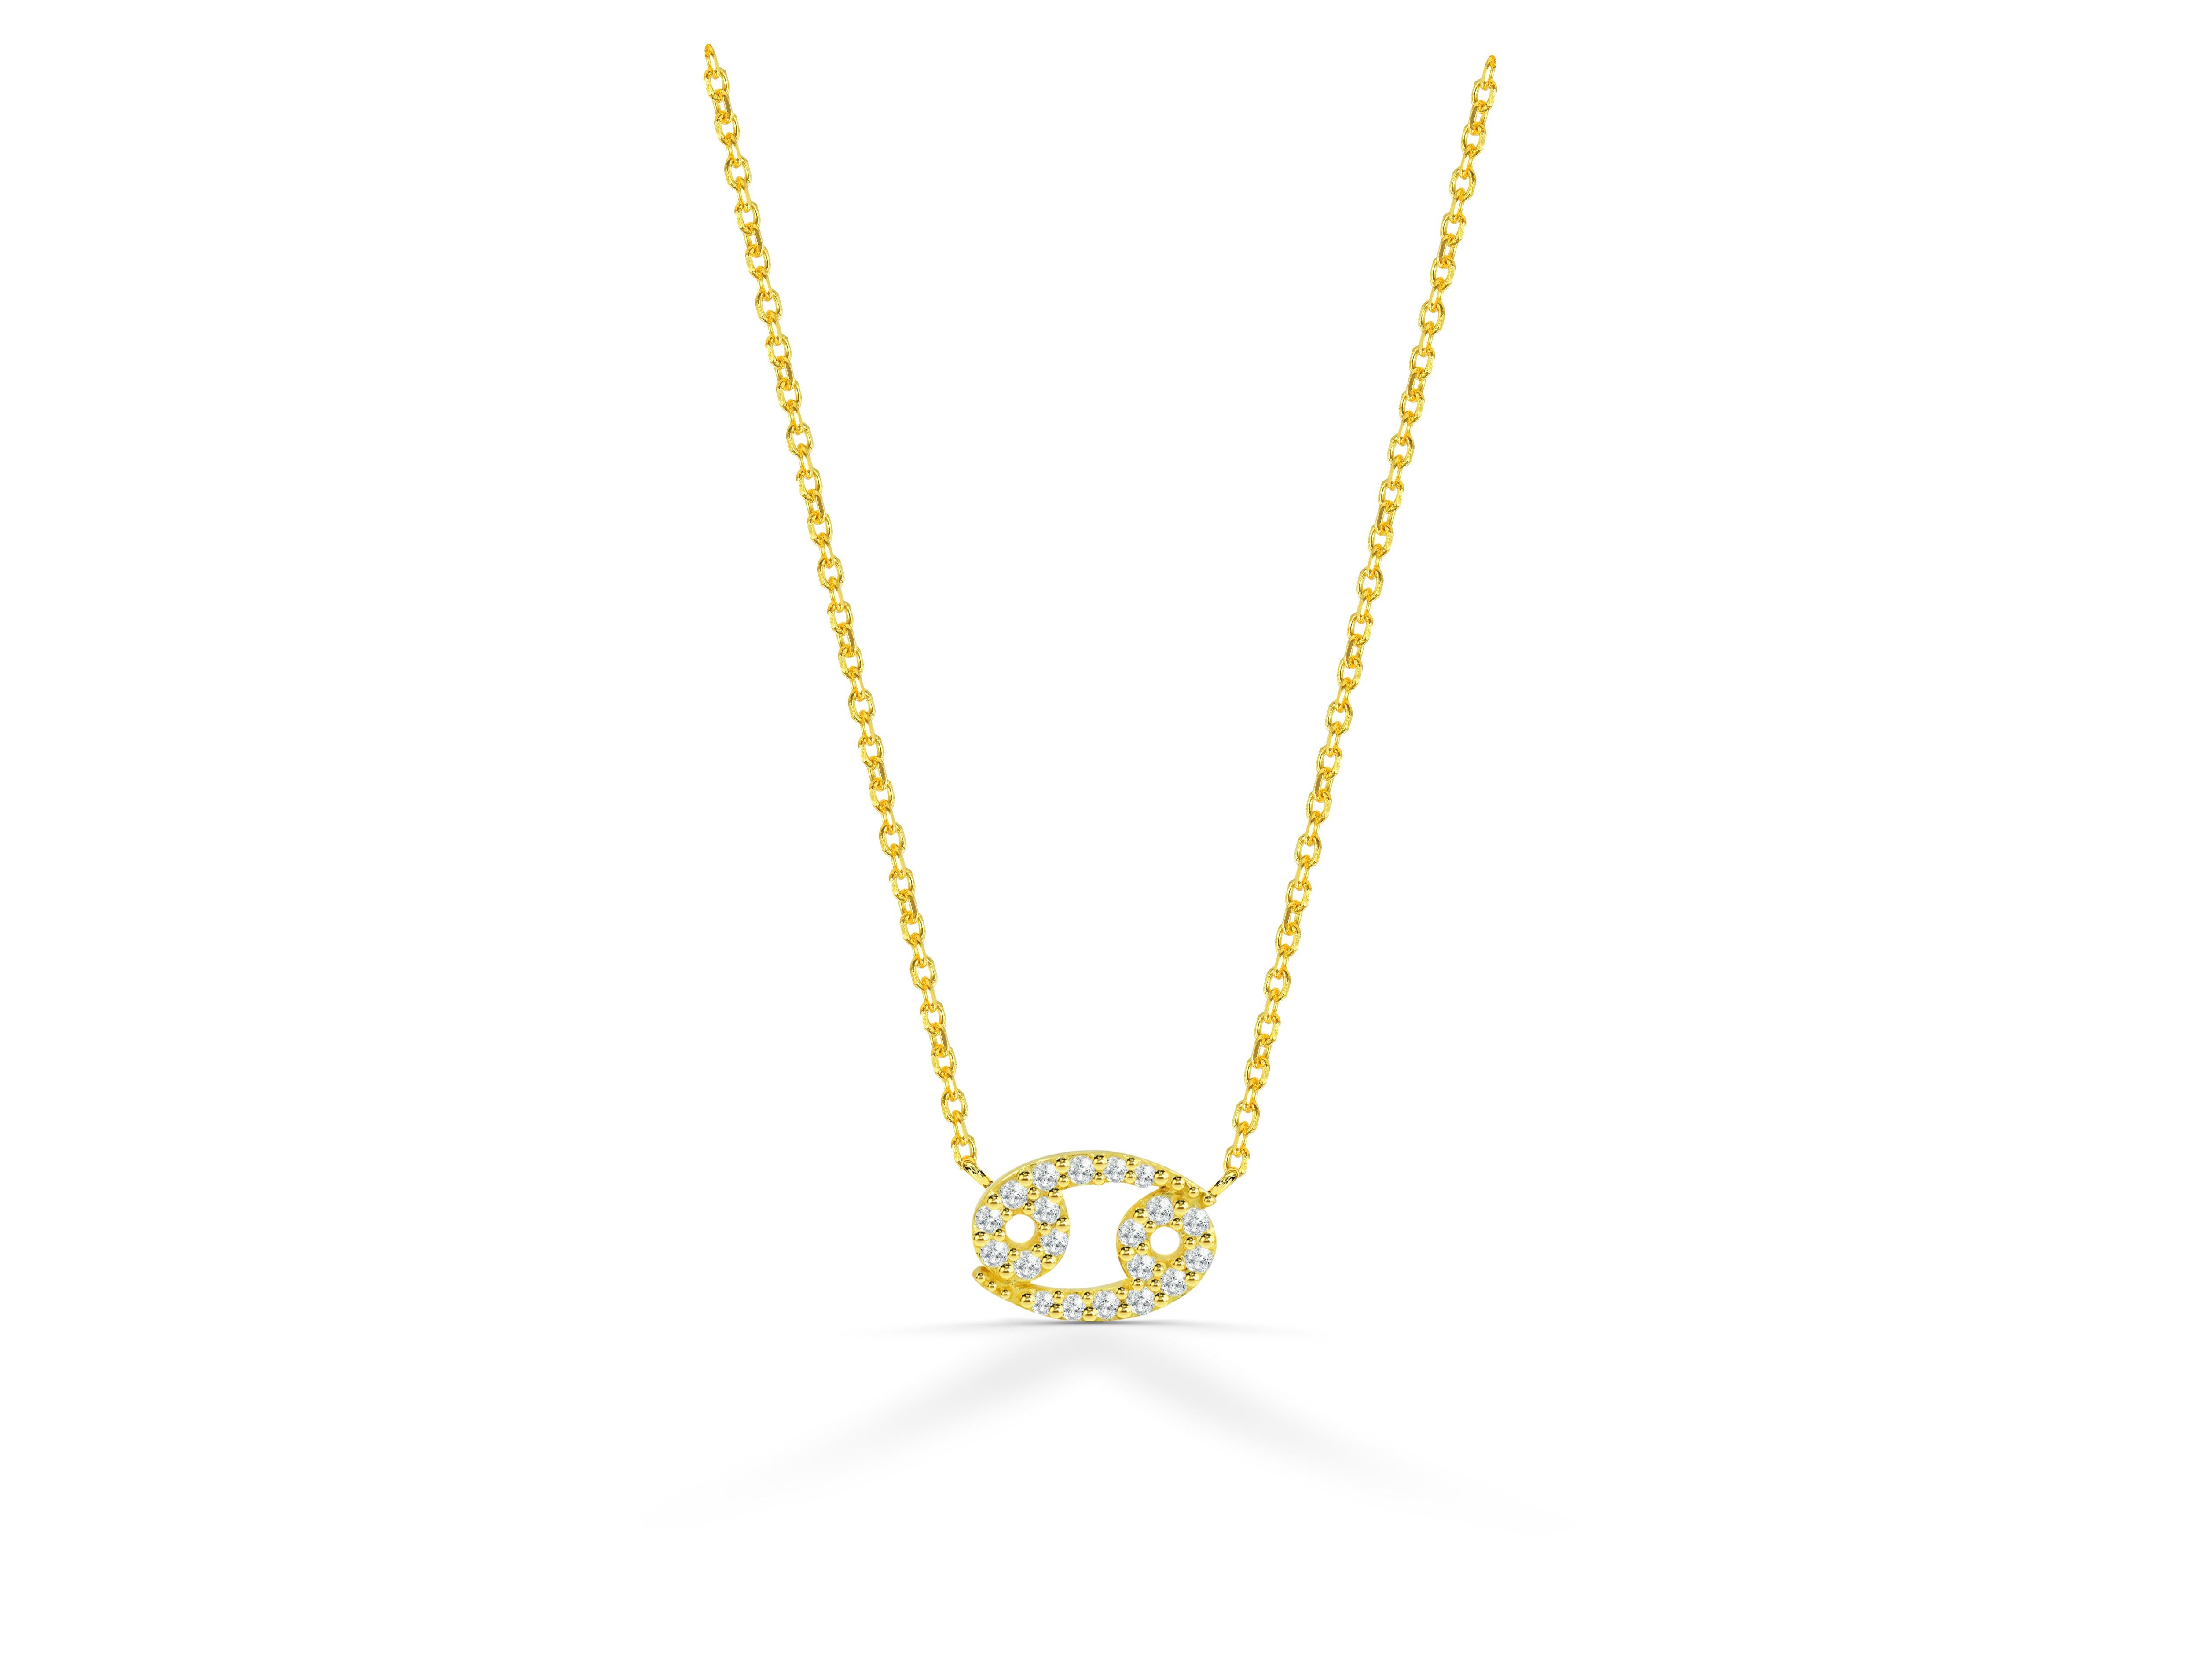 Beautiful and Sparkly Diamond Cancer Necklace is made of 18k solid gold available in three colors of gold, Rose Gold / White Gold / Yellow Gold.

Natural genuine round cut diamond each diamond is hand selected by me to ensure quality and set by a